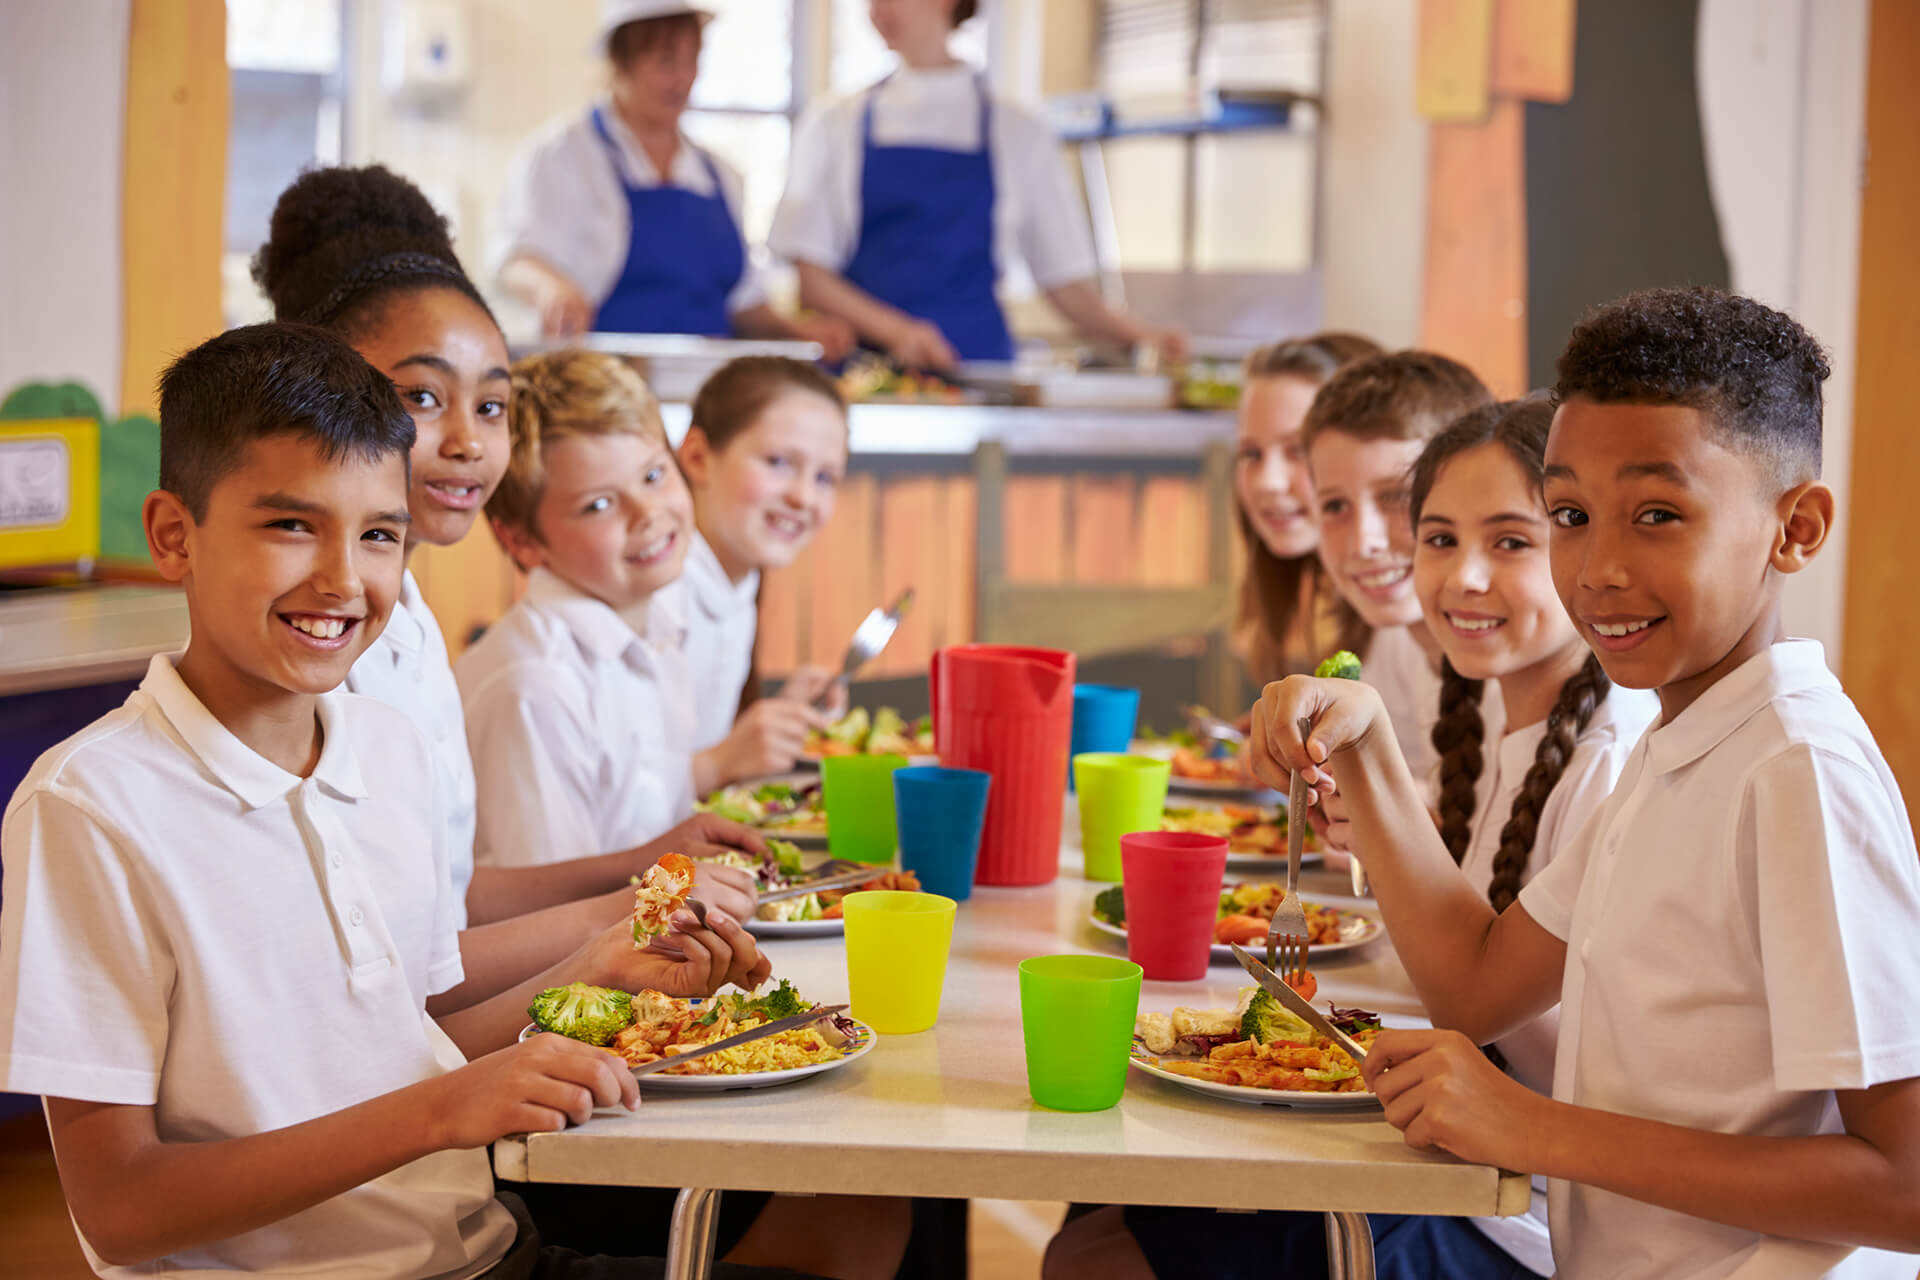 Students eating healthy lunch at cafeteria table